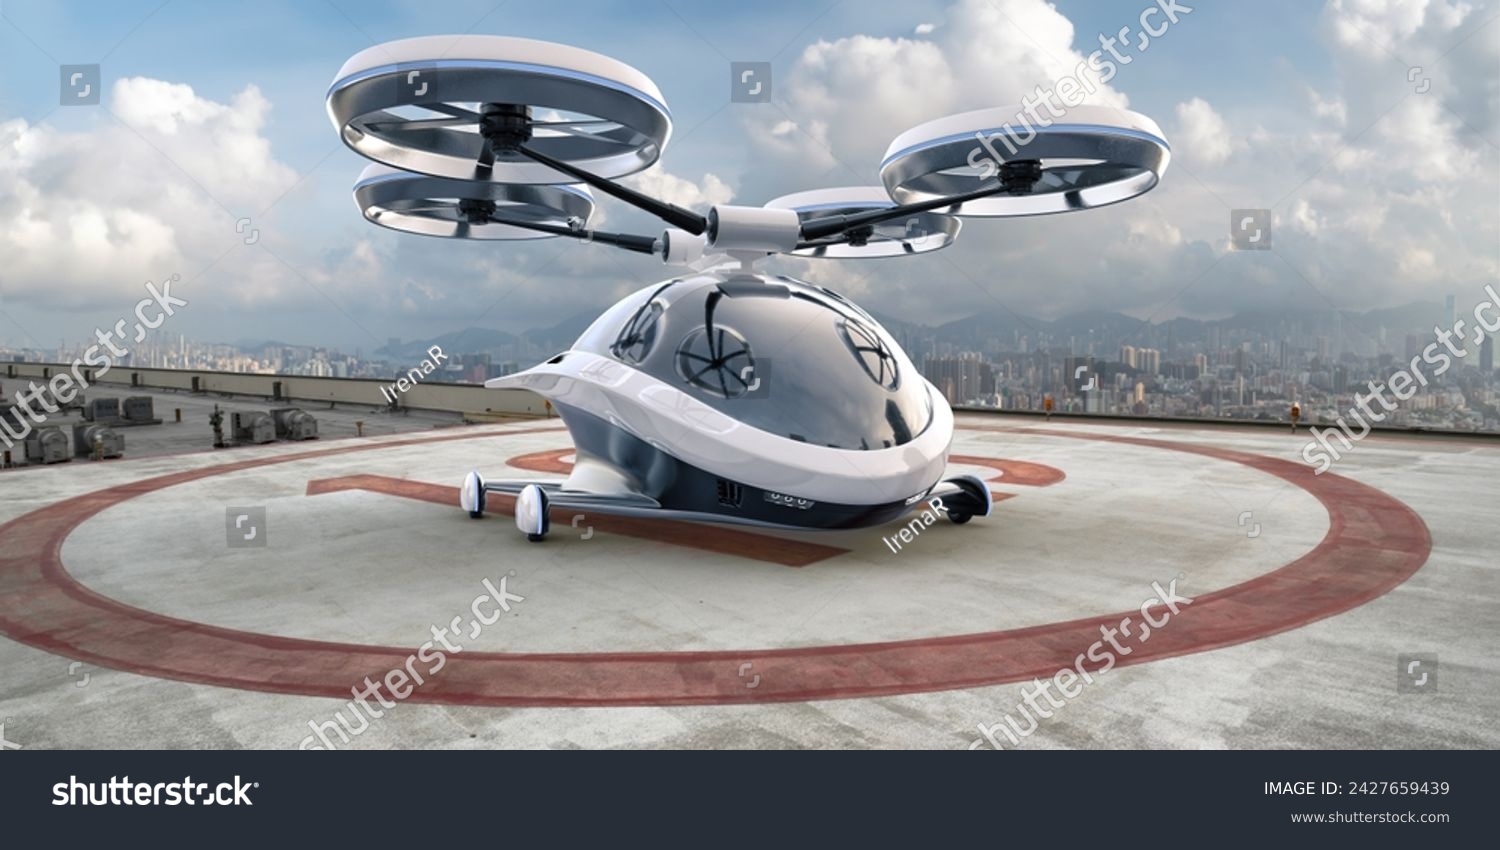 A generic white and grey eVTOL vehicle with blue highlights parked on a helipad on the rooftop of a high buildings in a downtown district with view of high rise city buildings in the background, under #2427659439